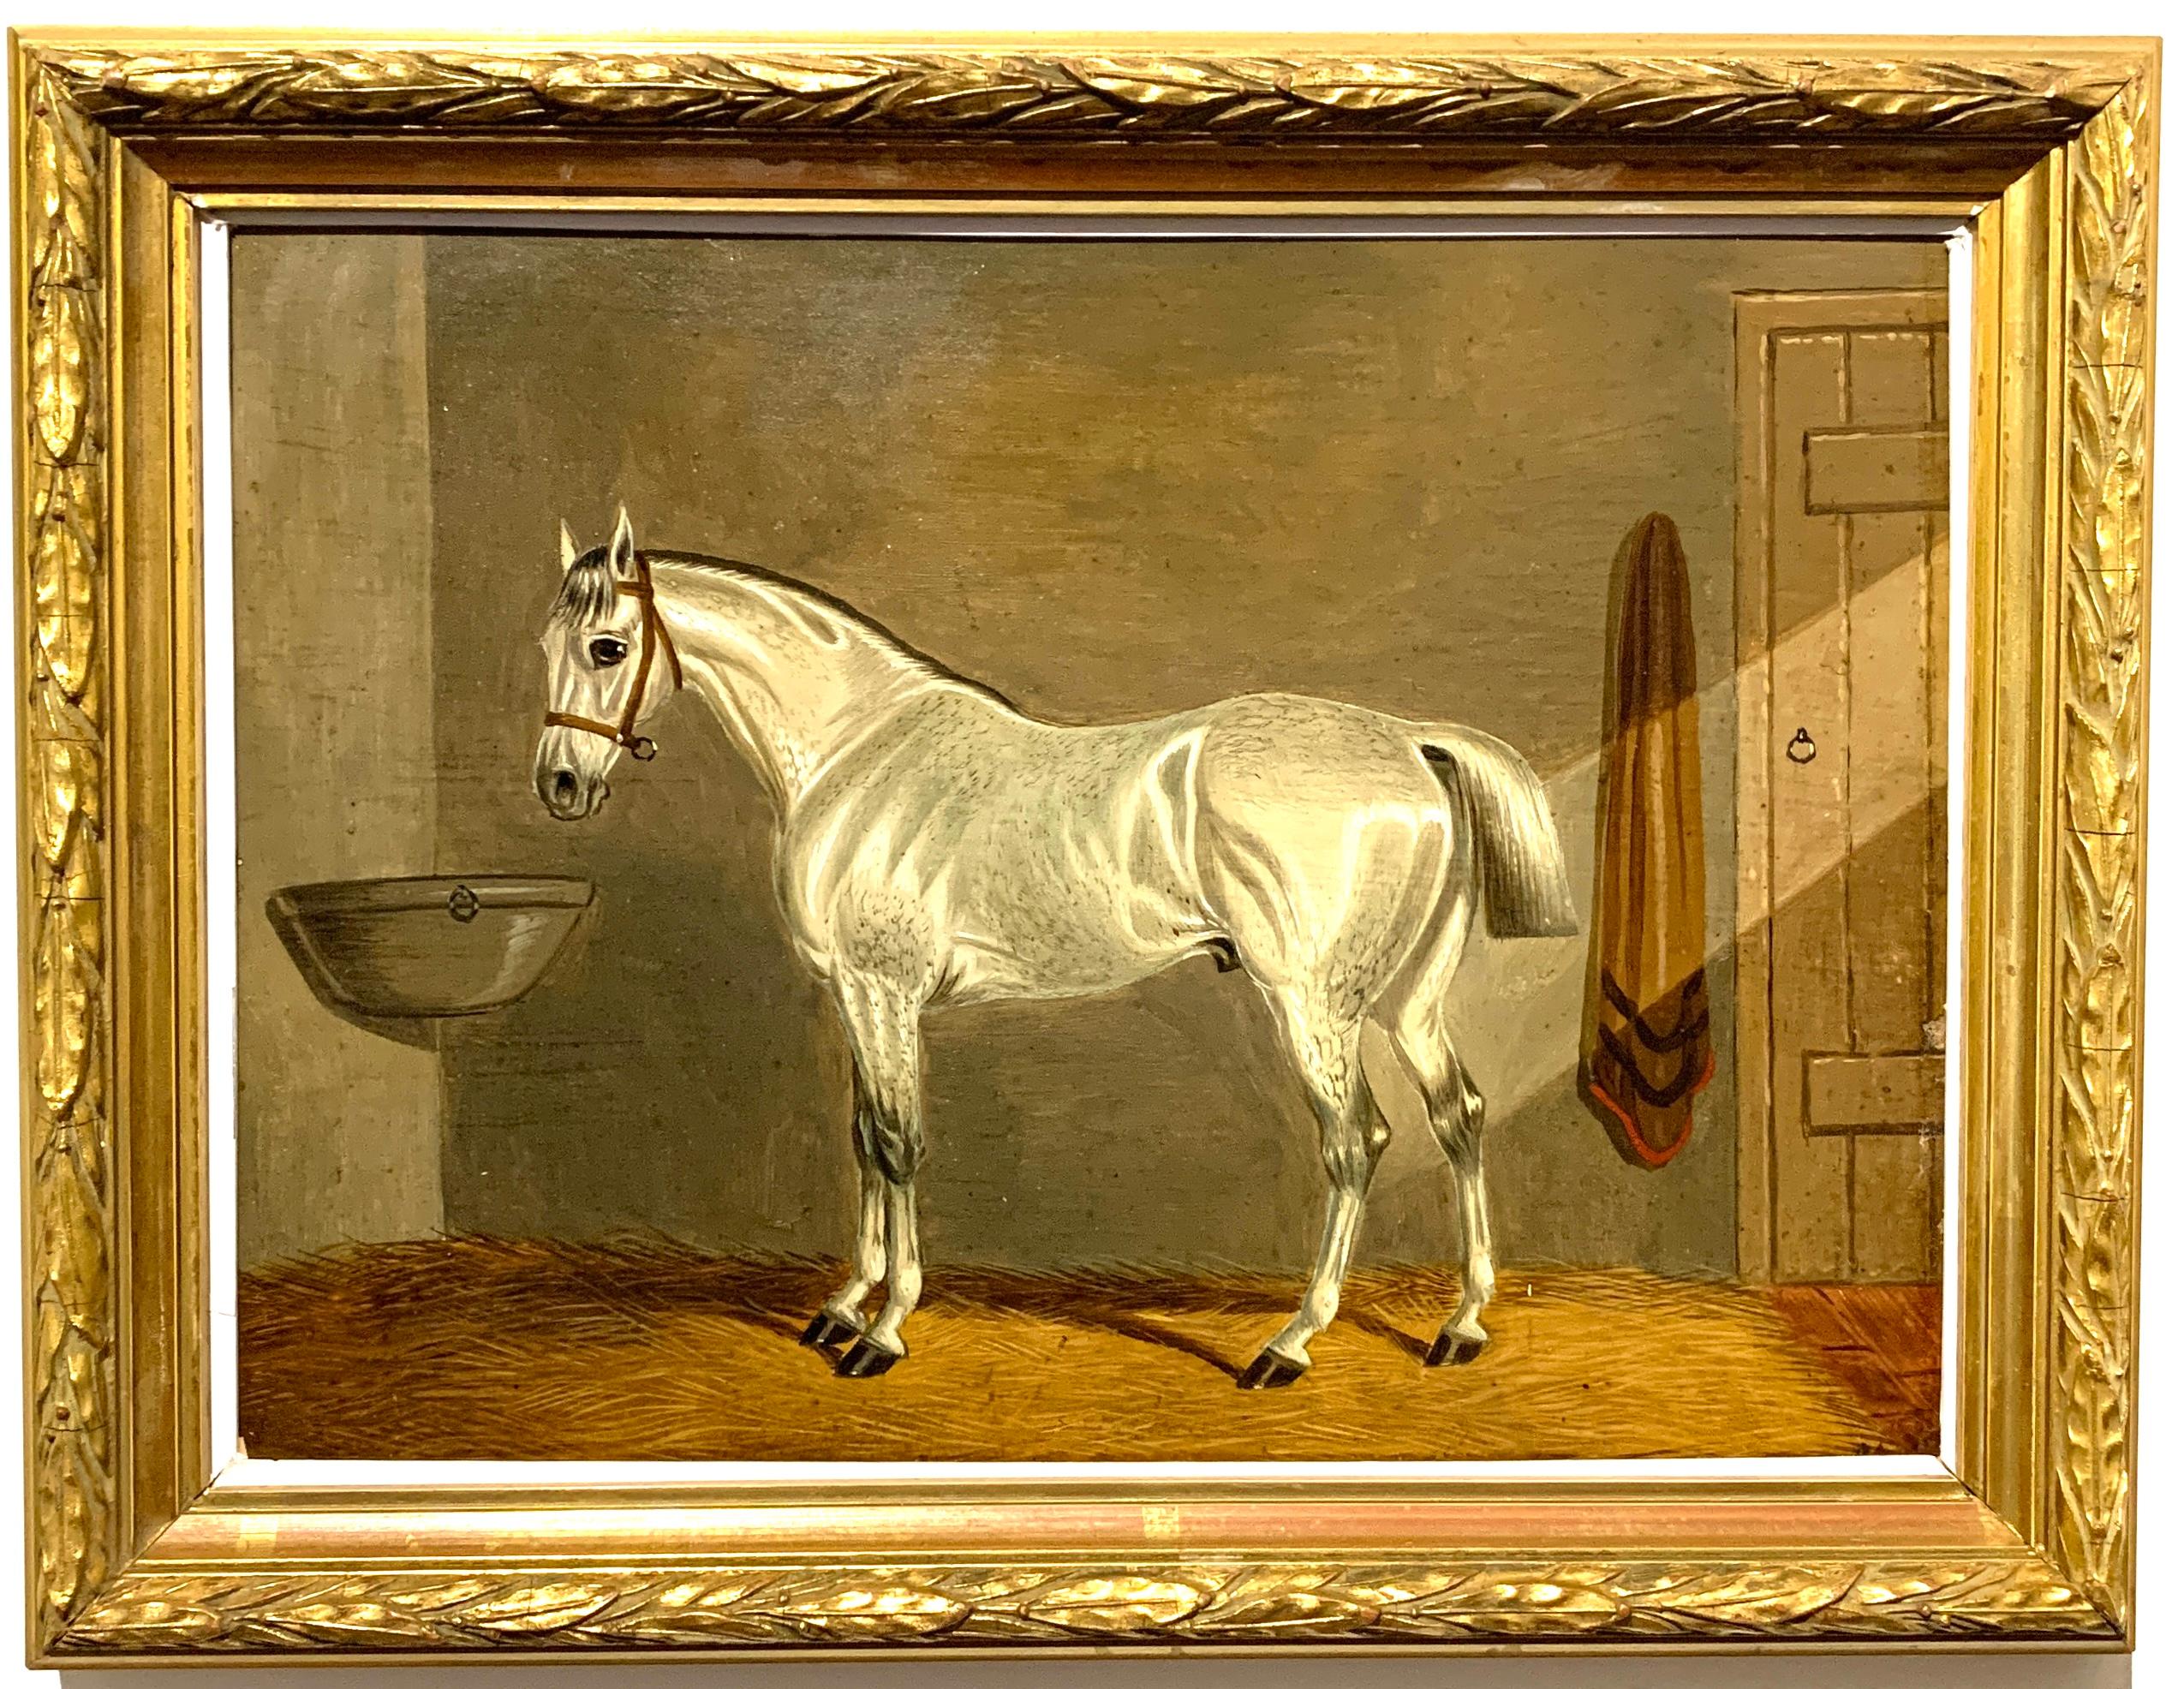 19th century Antique Portrait of an English Gray Horse in a stable in oils. - Brown Animal Painting by Edwin Loder